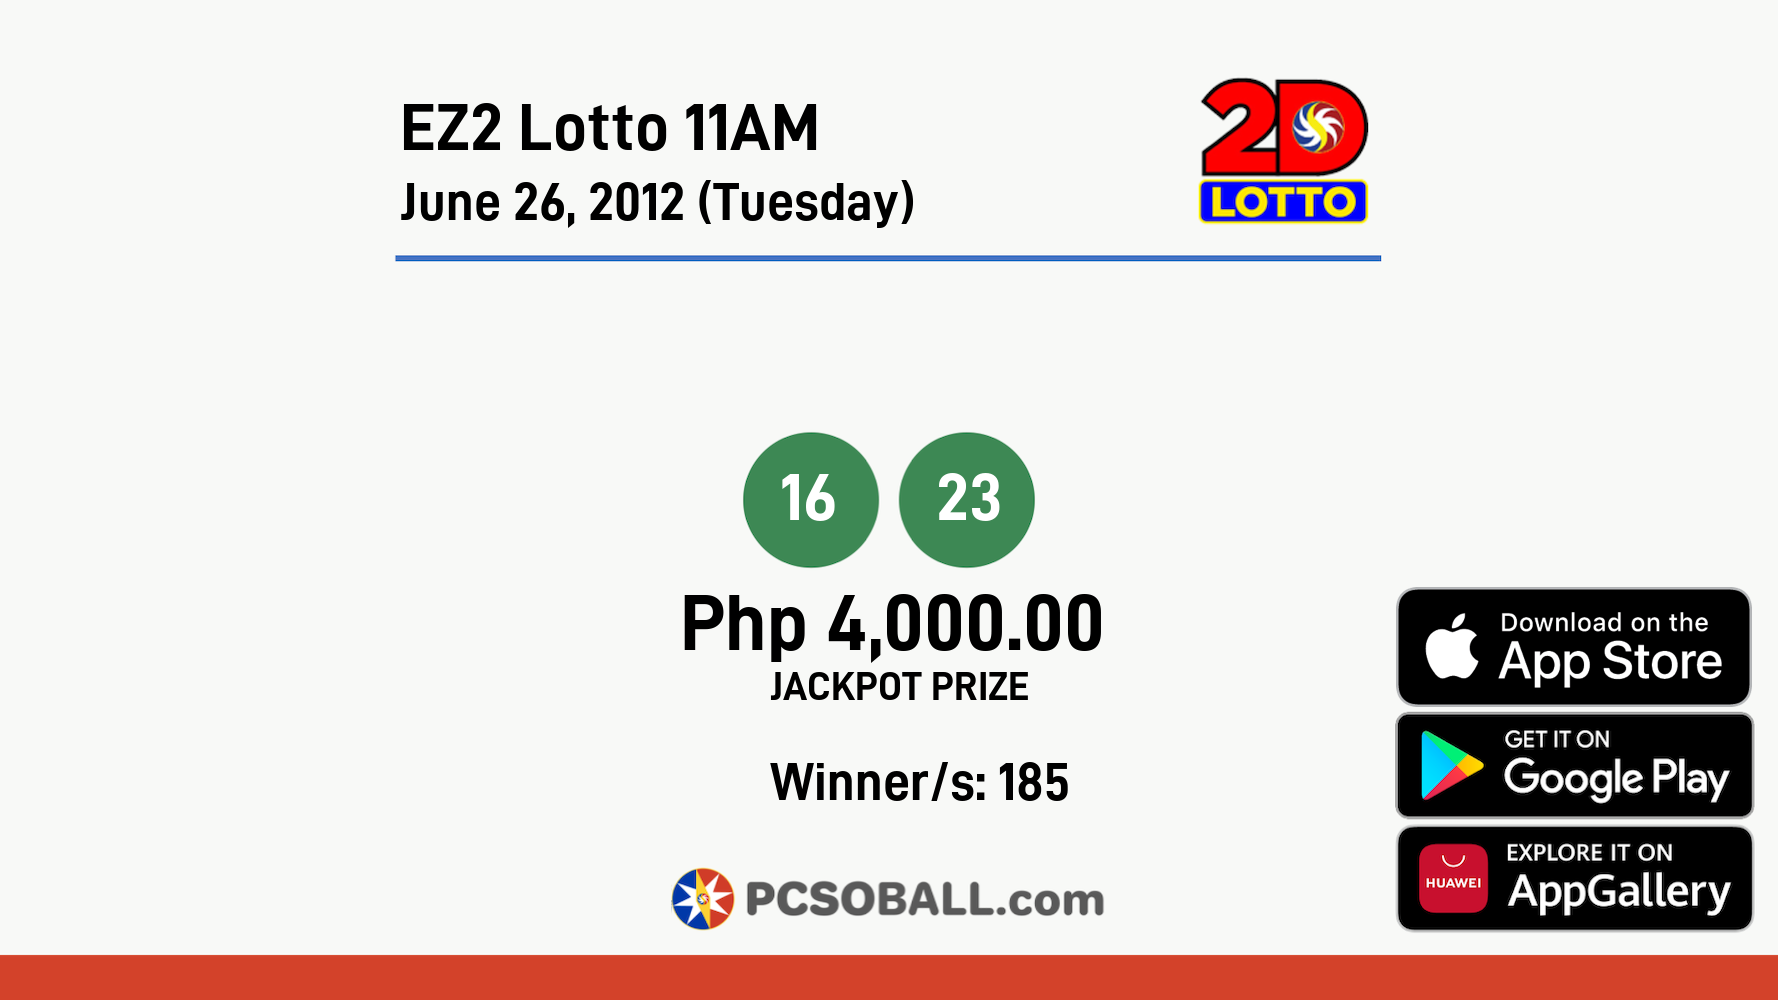 EZ2 Lotto 11AM June 26, 2012 (Tuesday) Result